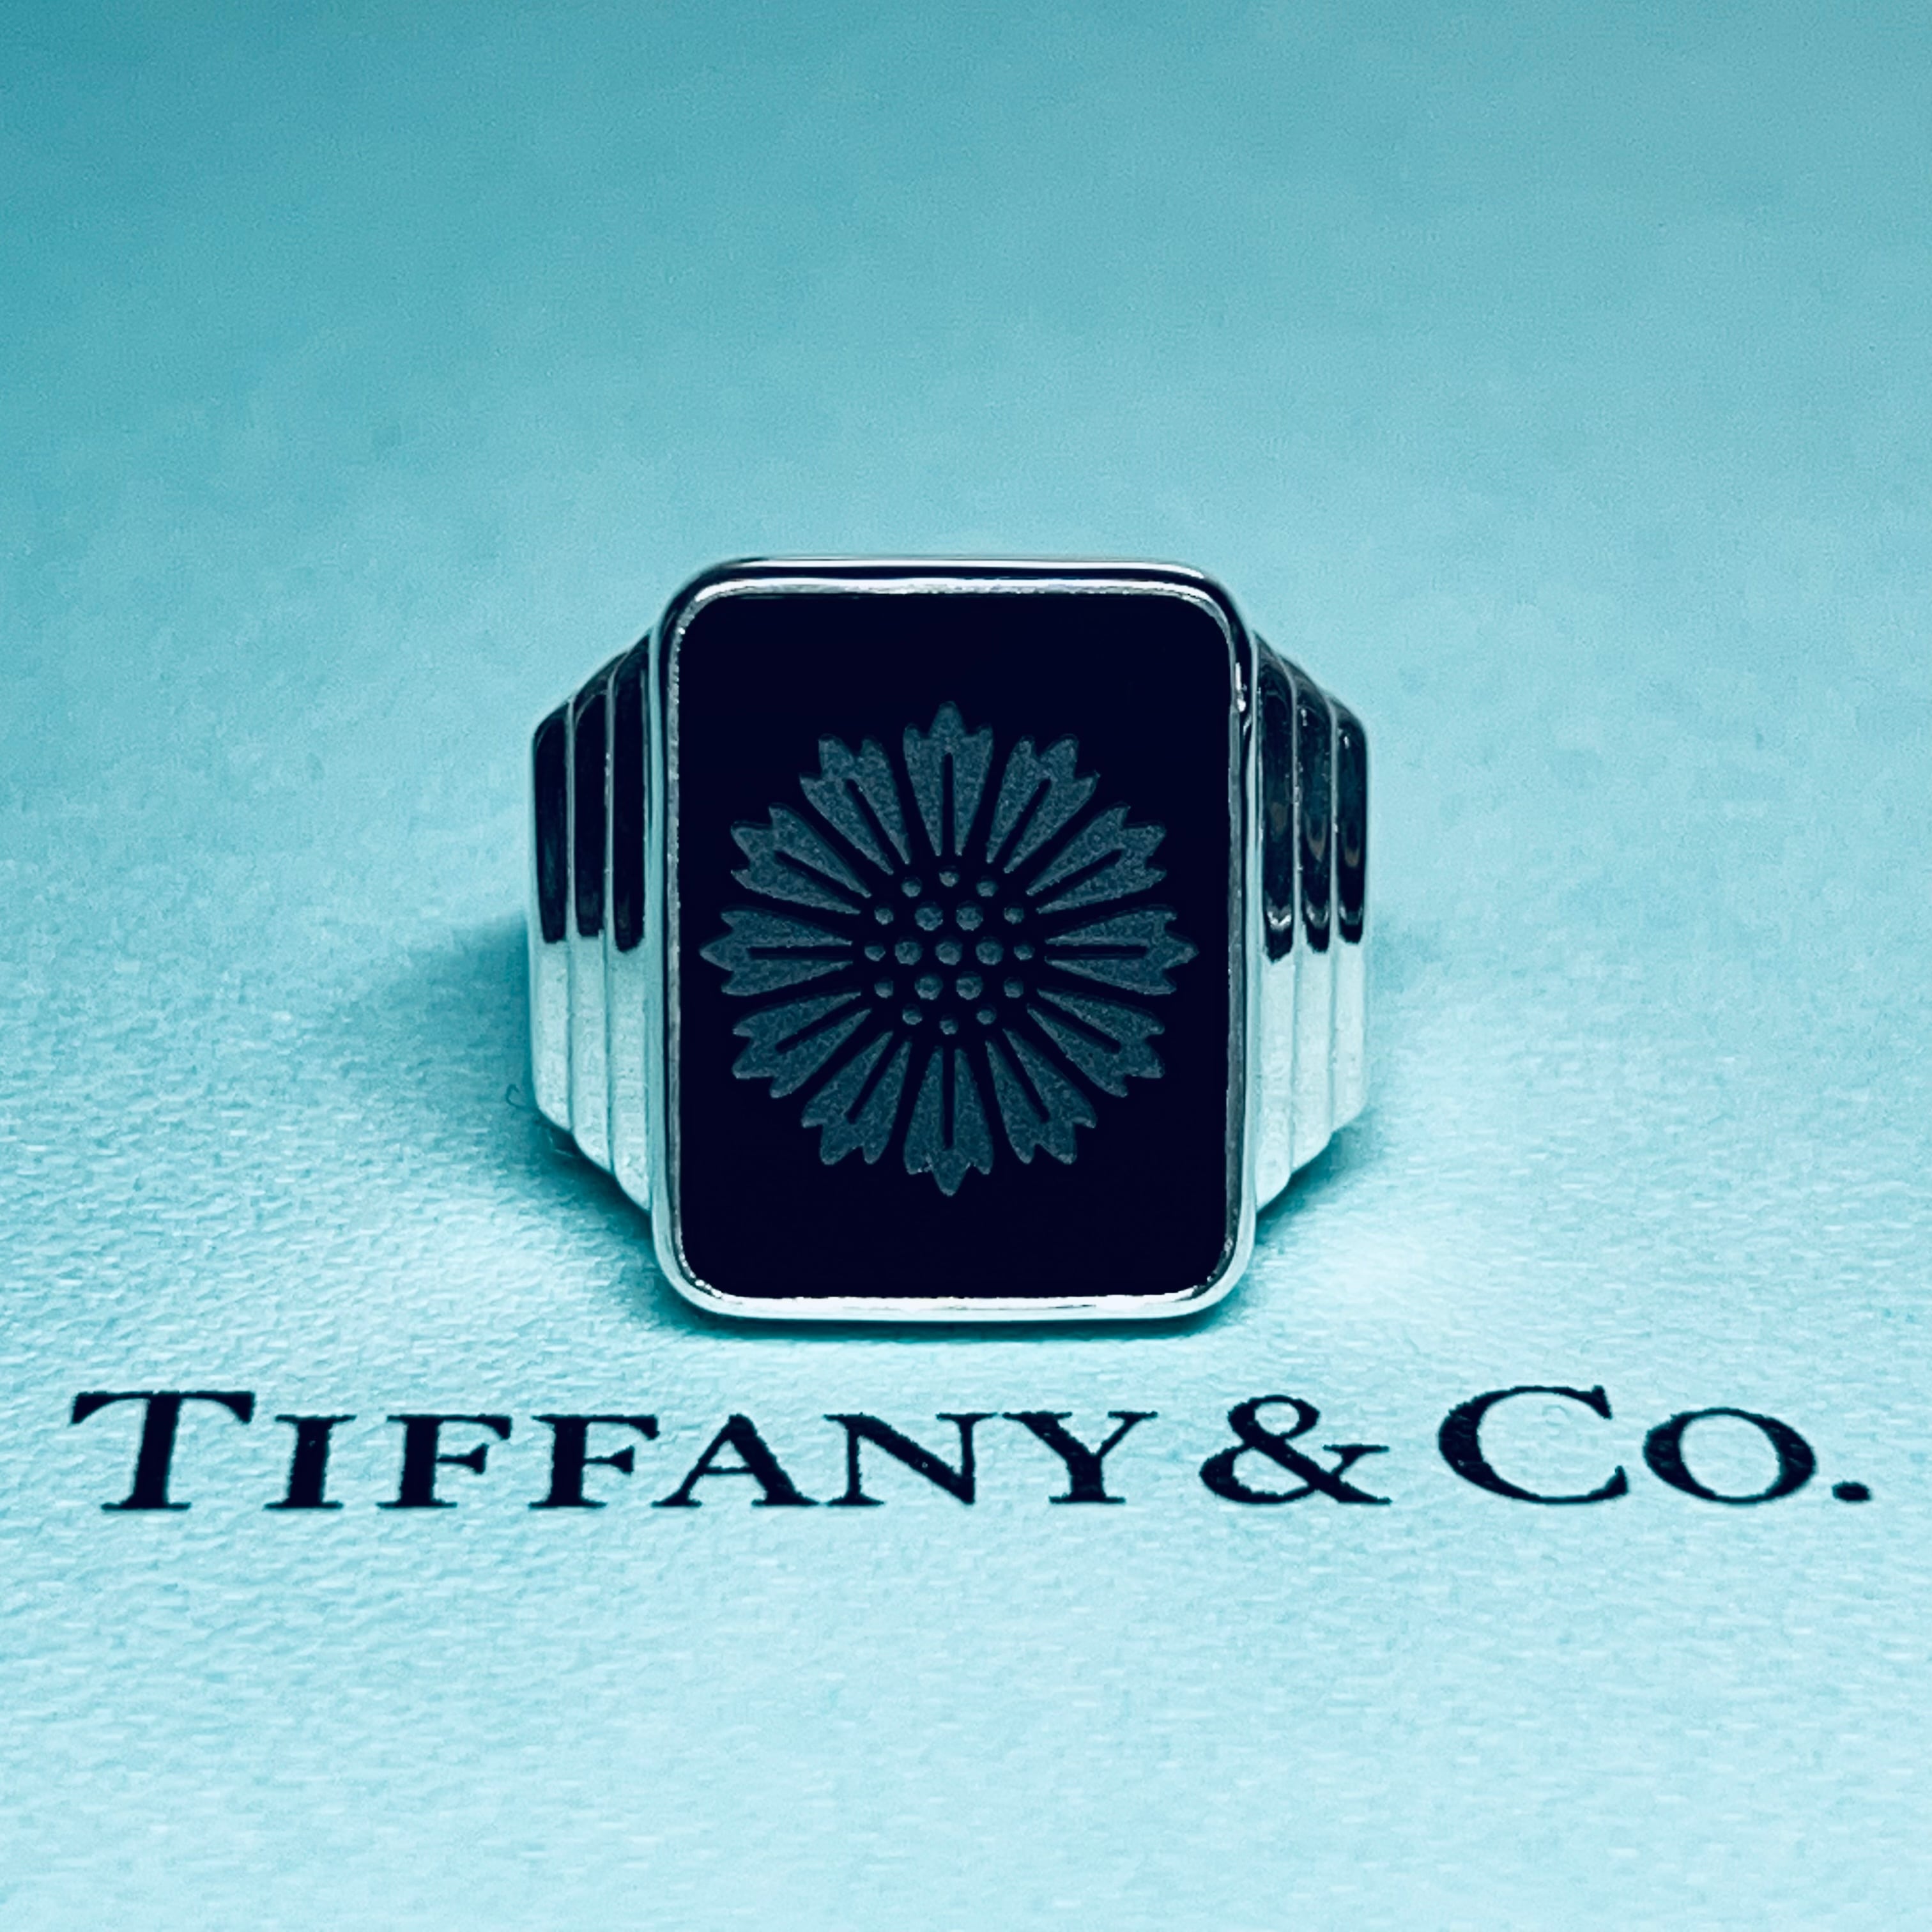 OLD TIFFANY & CO. Black Onyx Daisy Signet Ring Sterling Silver